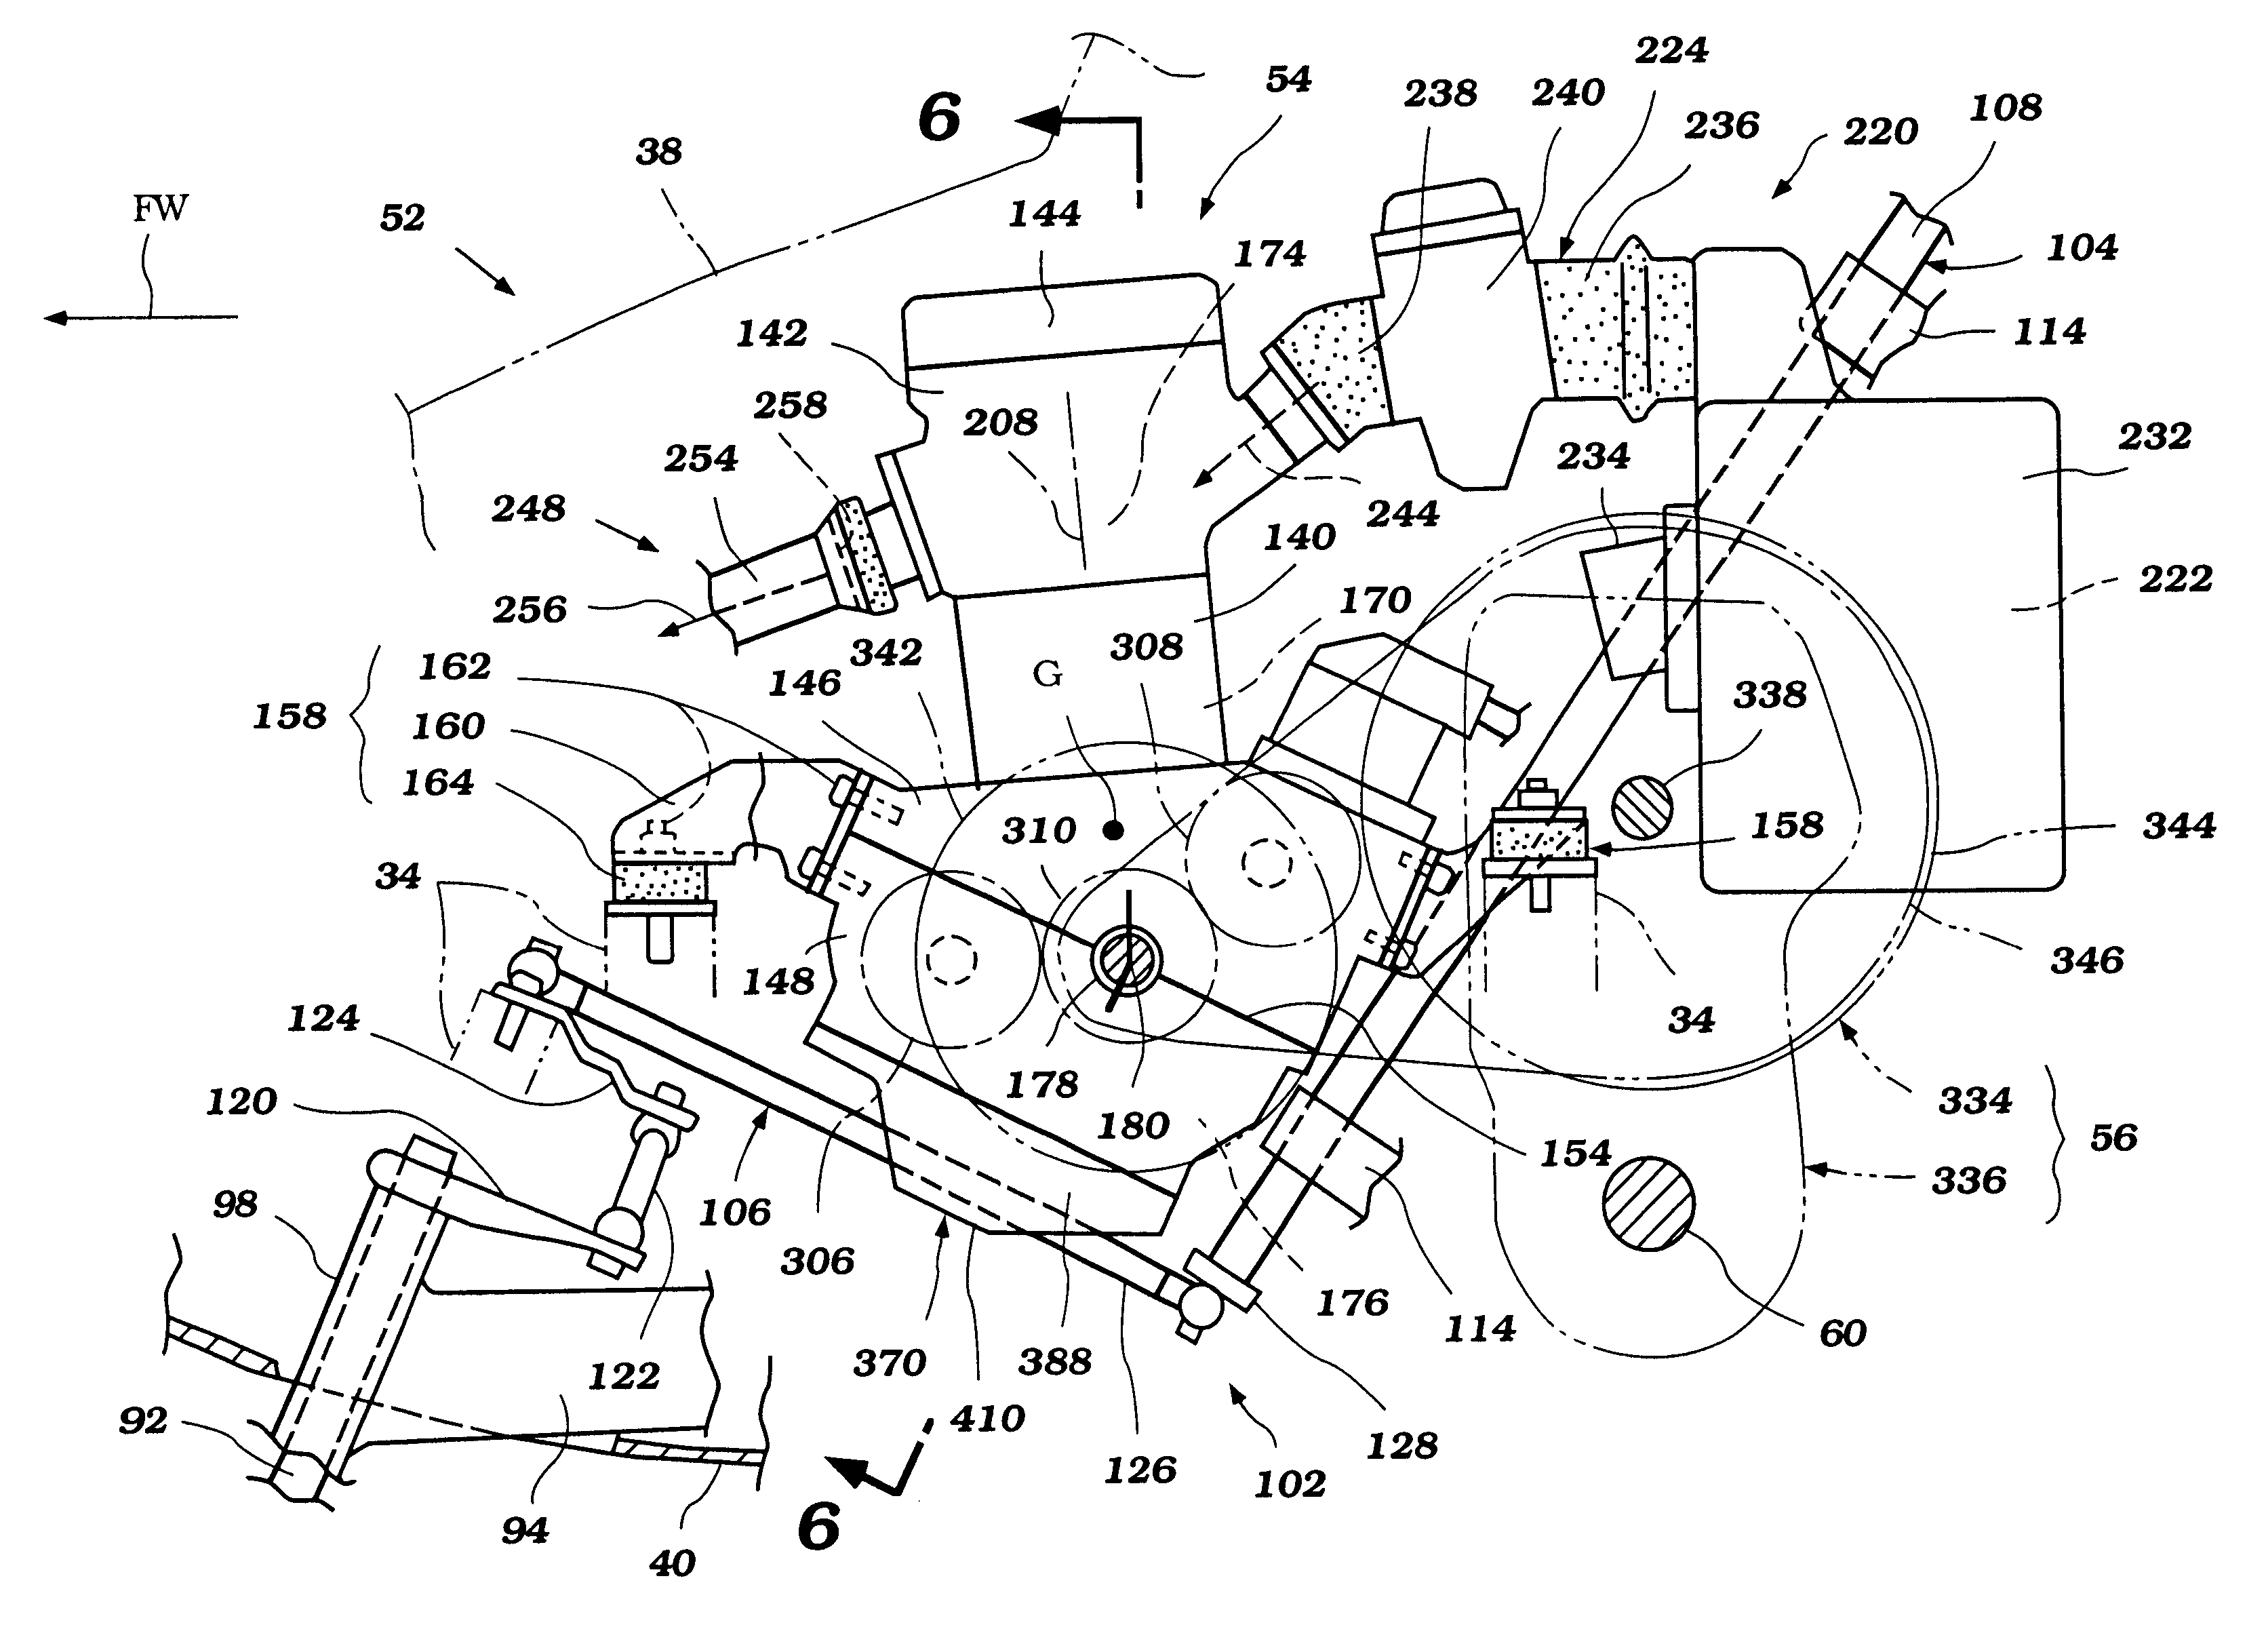 Steering and lubrication system component arrangement for land vehicles